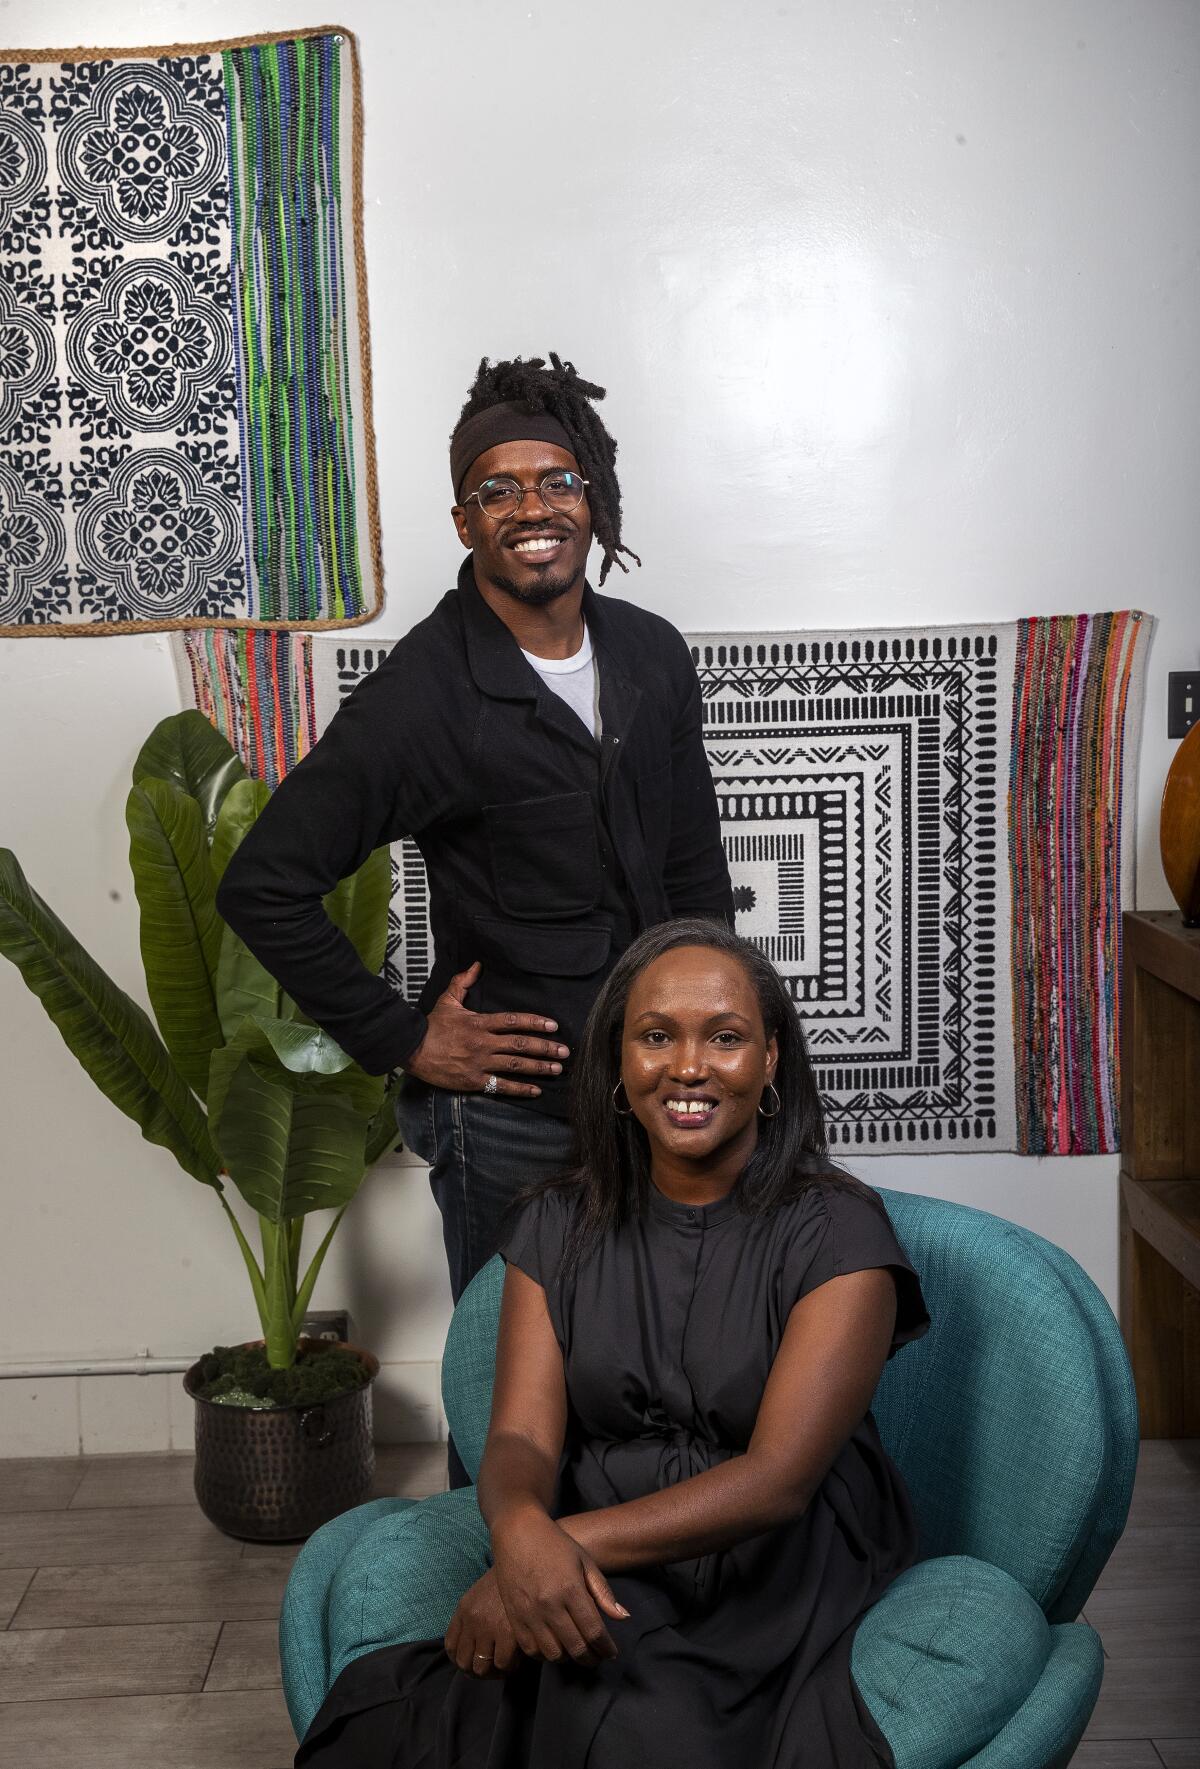 Meymuna Hussein-Cattan and Christian Davis are photographed against a white wall.